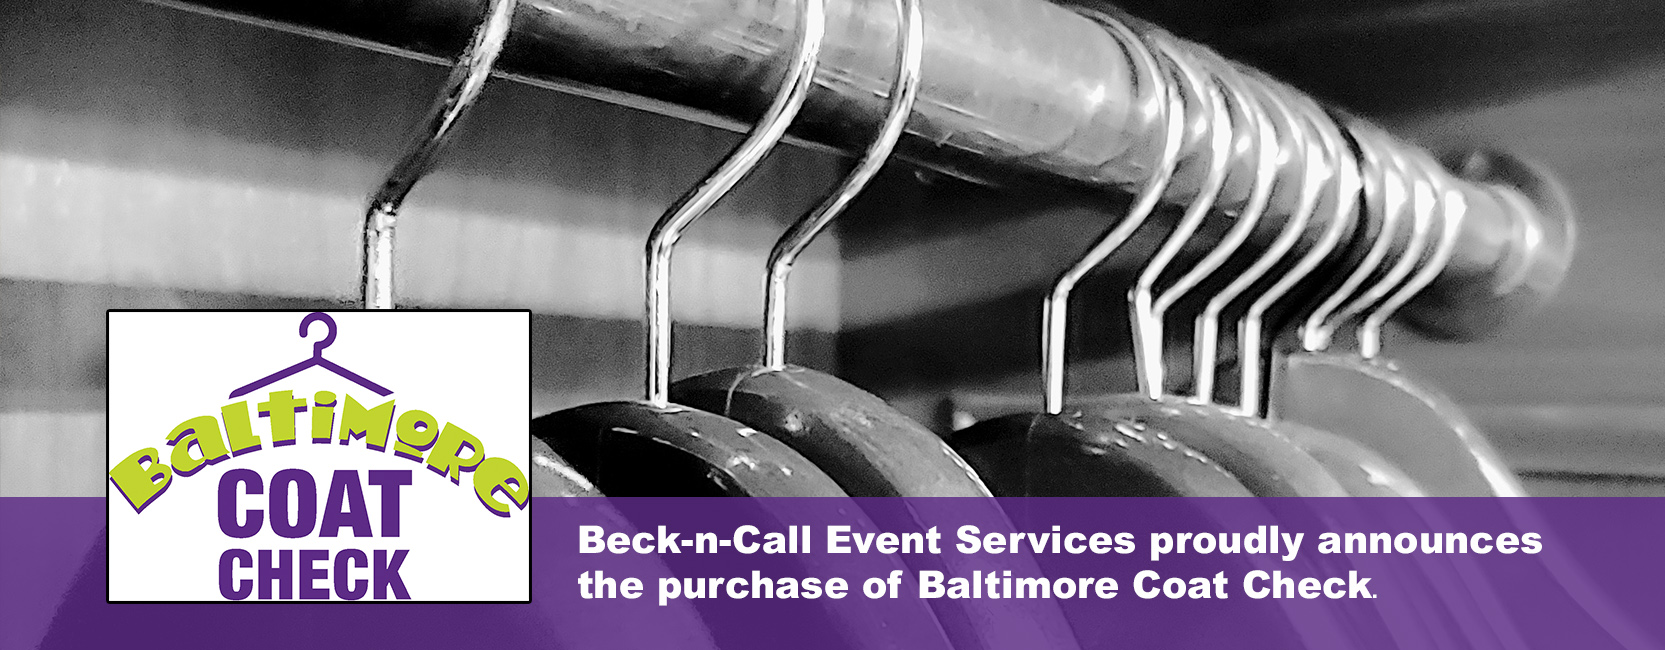 Beck-n-Call Event Services proudly announces the purchase of Baltimore Coat Check to add to its line of services offered.